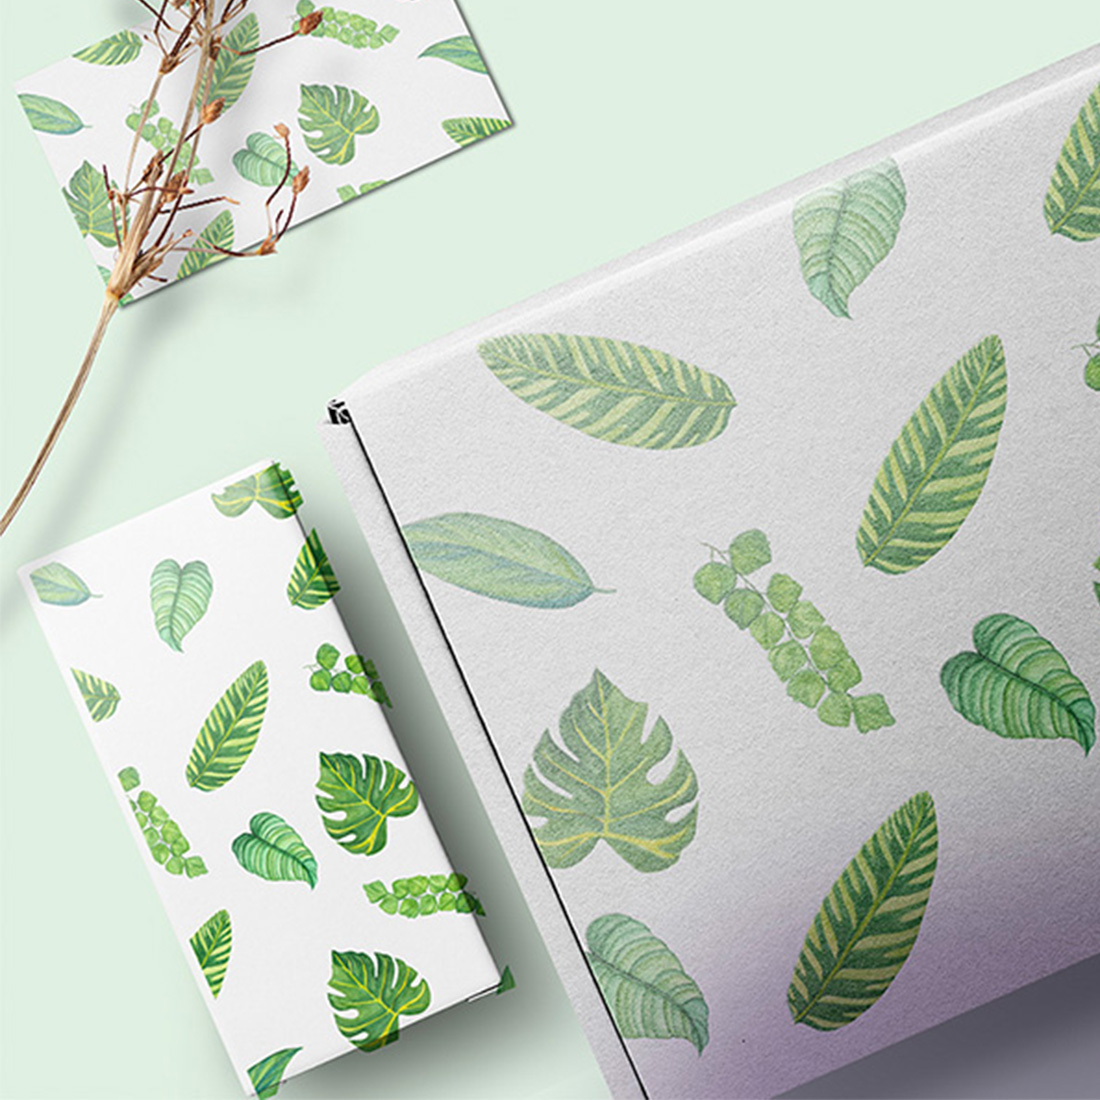 Diverse of spaces with leaves prints.